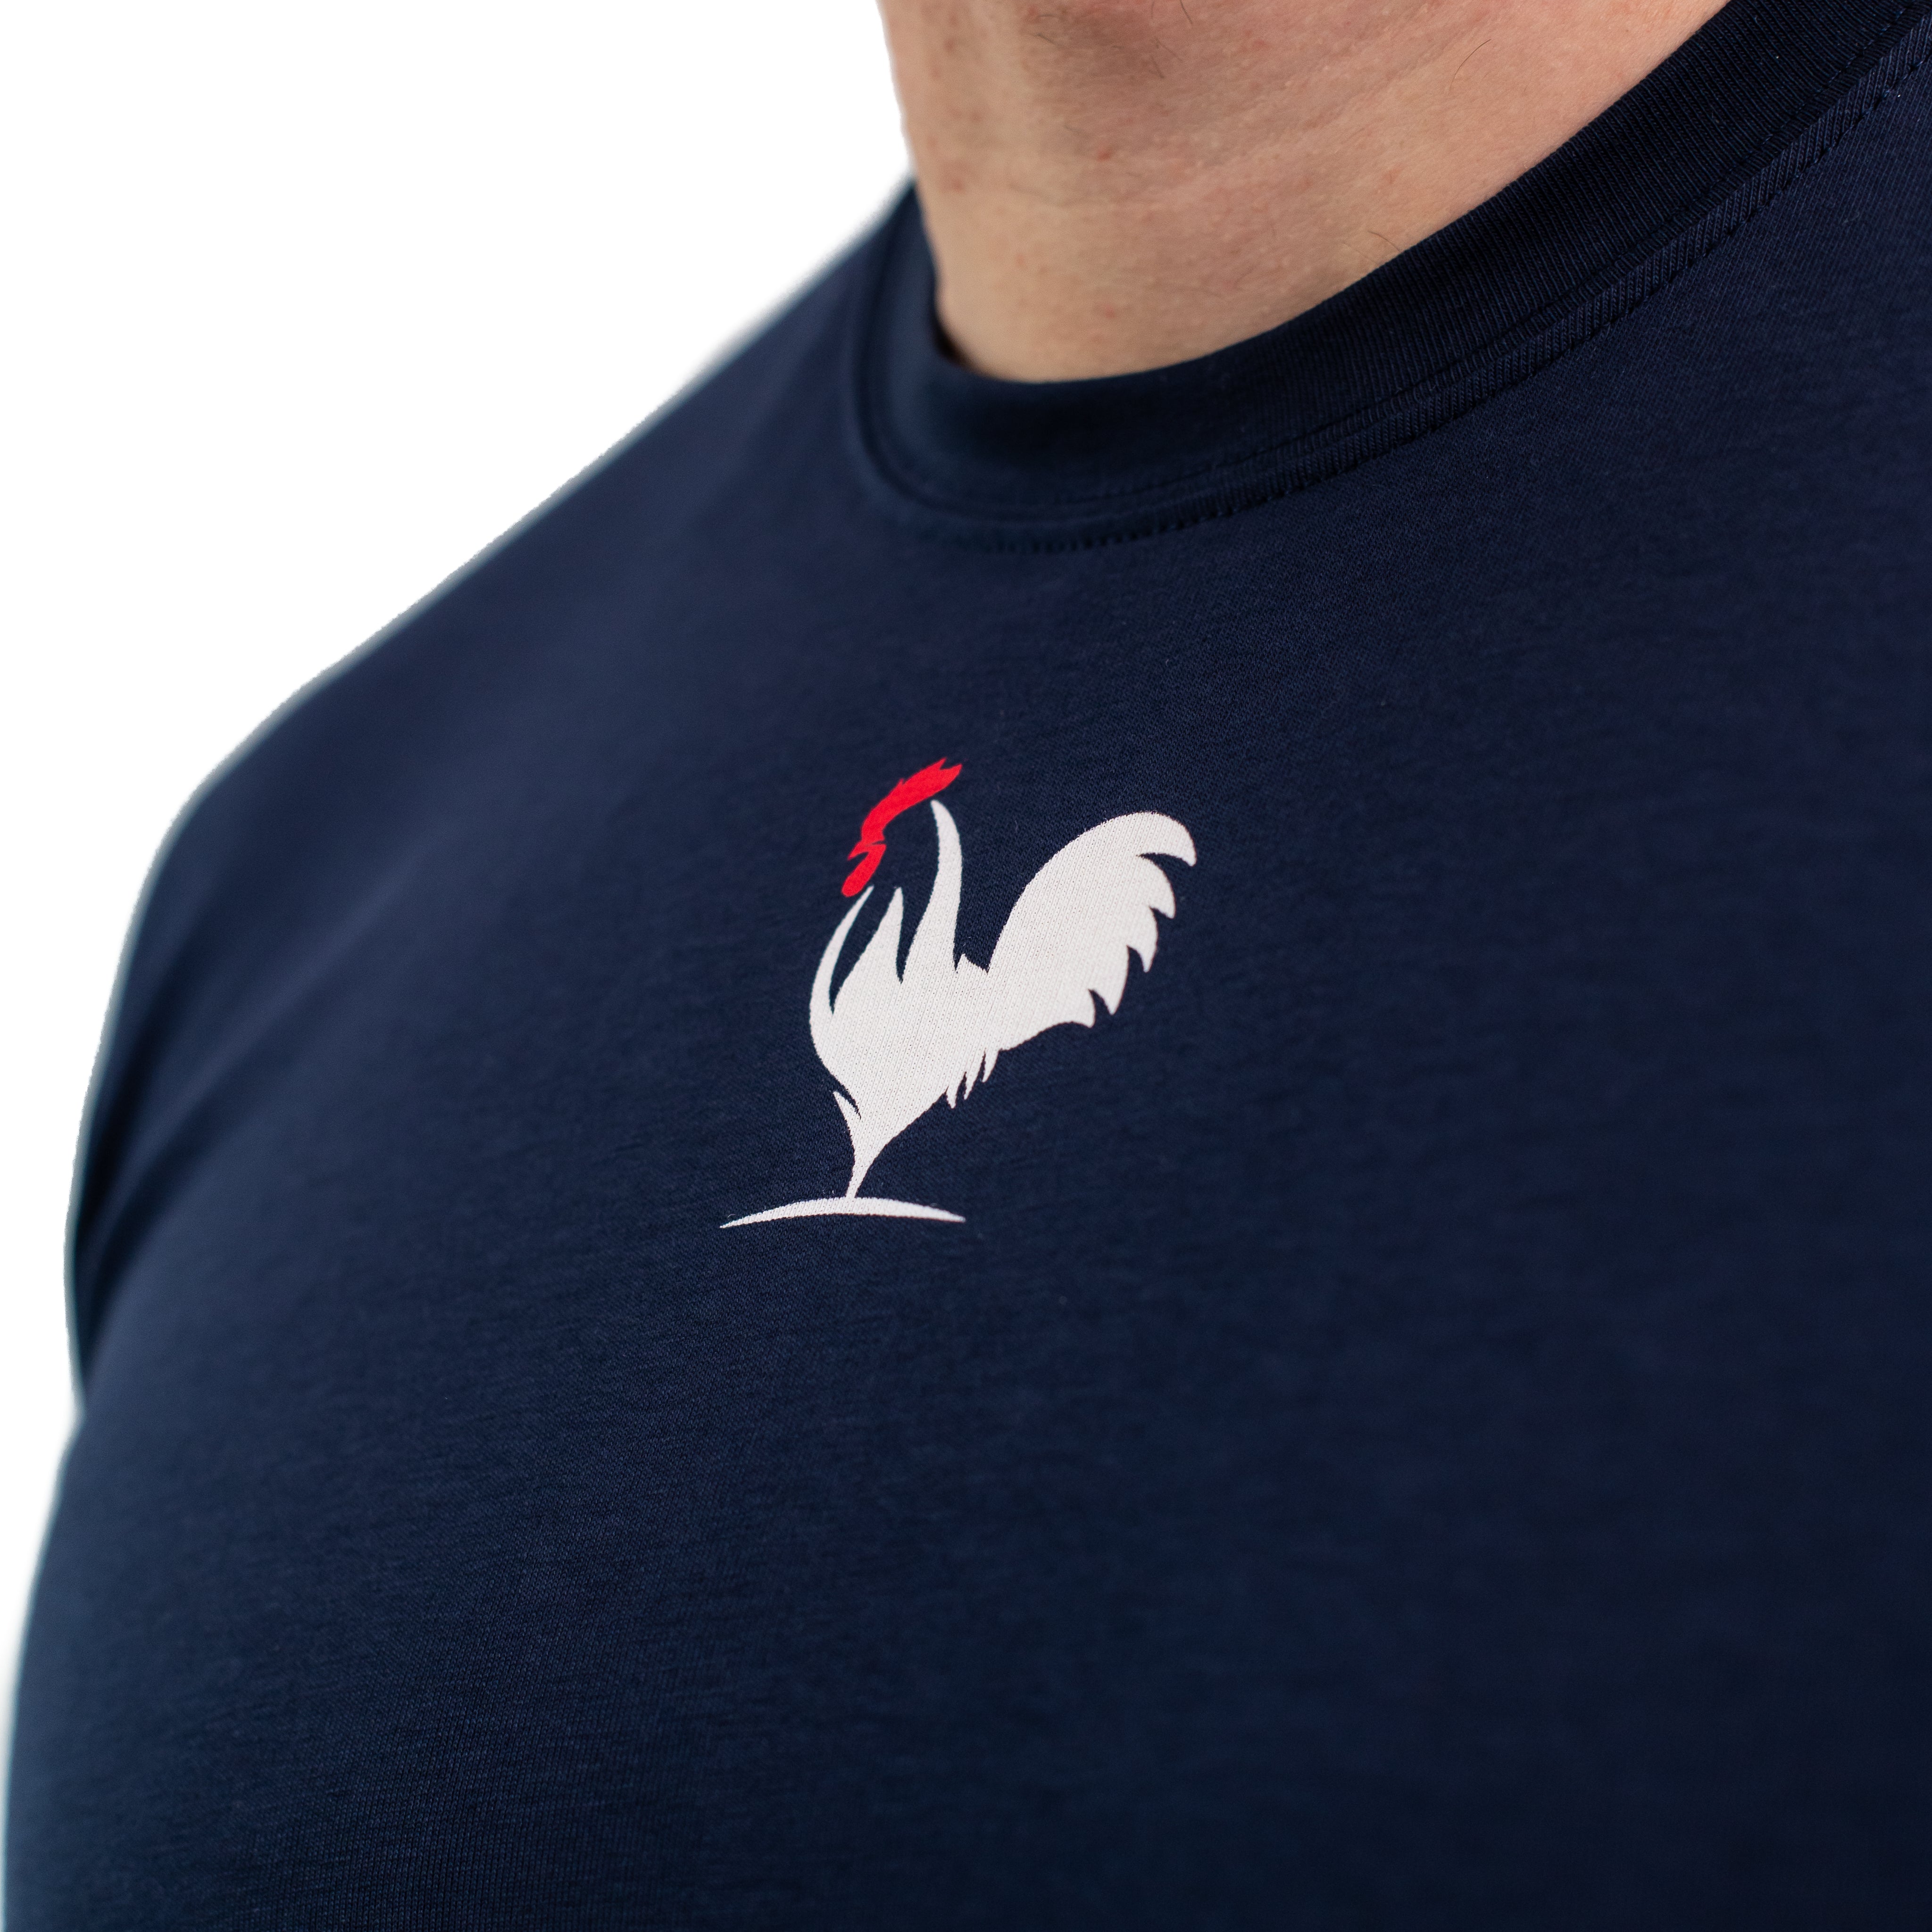 The A7 France Meet Shirt honours the pride and power of one of the strongest countries in Europe and one that you can bring to the platform for comp day or just in training! The A7 France Meet Shirt is an essential in any IPF approved kit. This A7 France Meet Shirt is approved for use in the IPF, EPF and most major federations. 